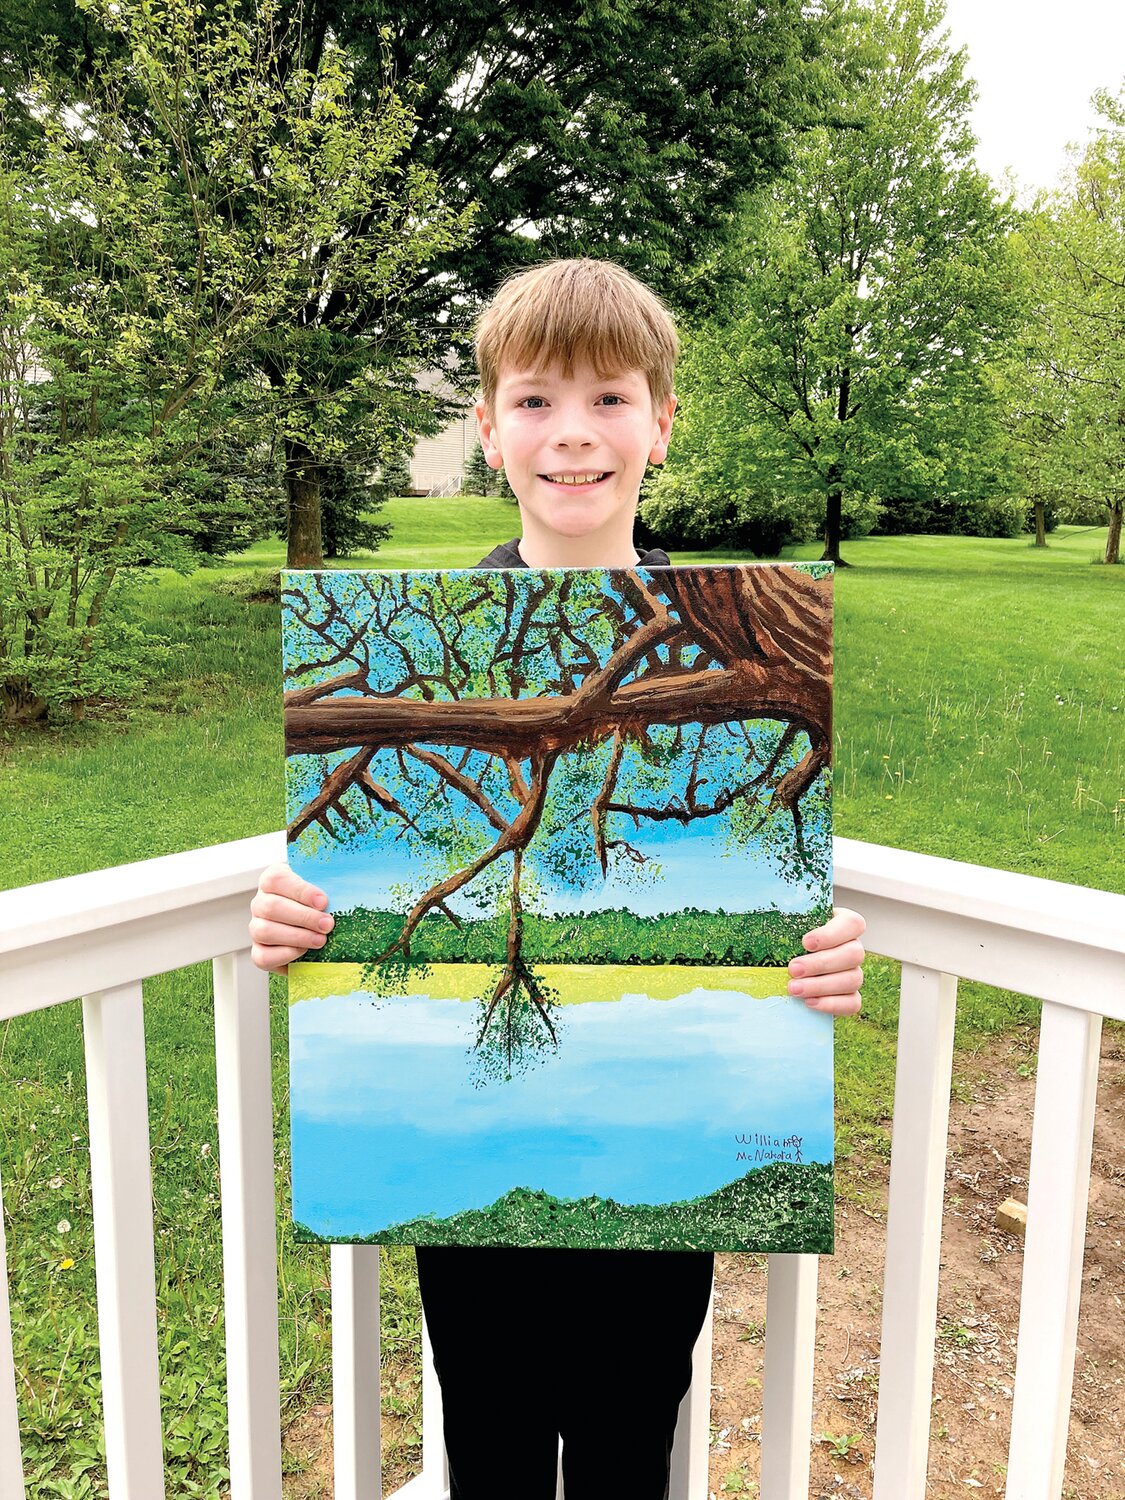 Artist William McNamara displays his painting, “Spring Lake,” created for a youth art show titled “Happy Trees,” aimed at raising awareness about protecting the environment.